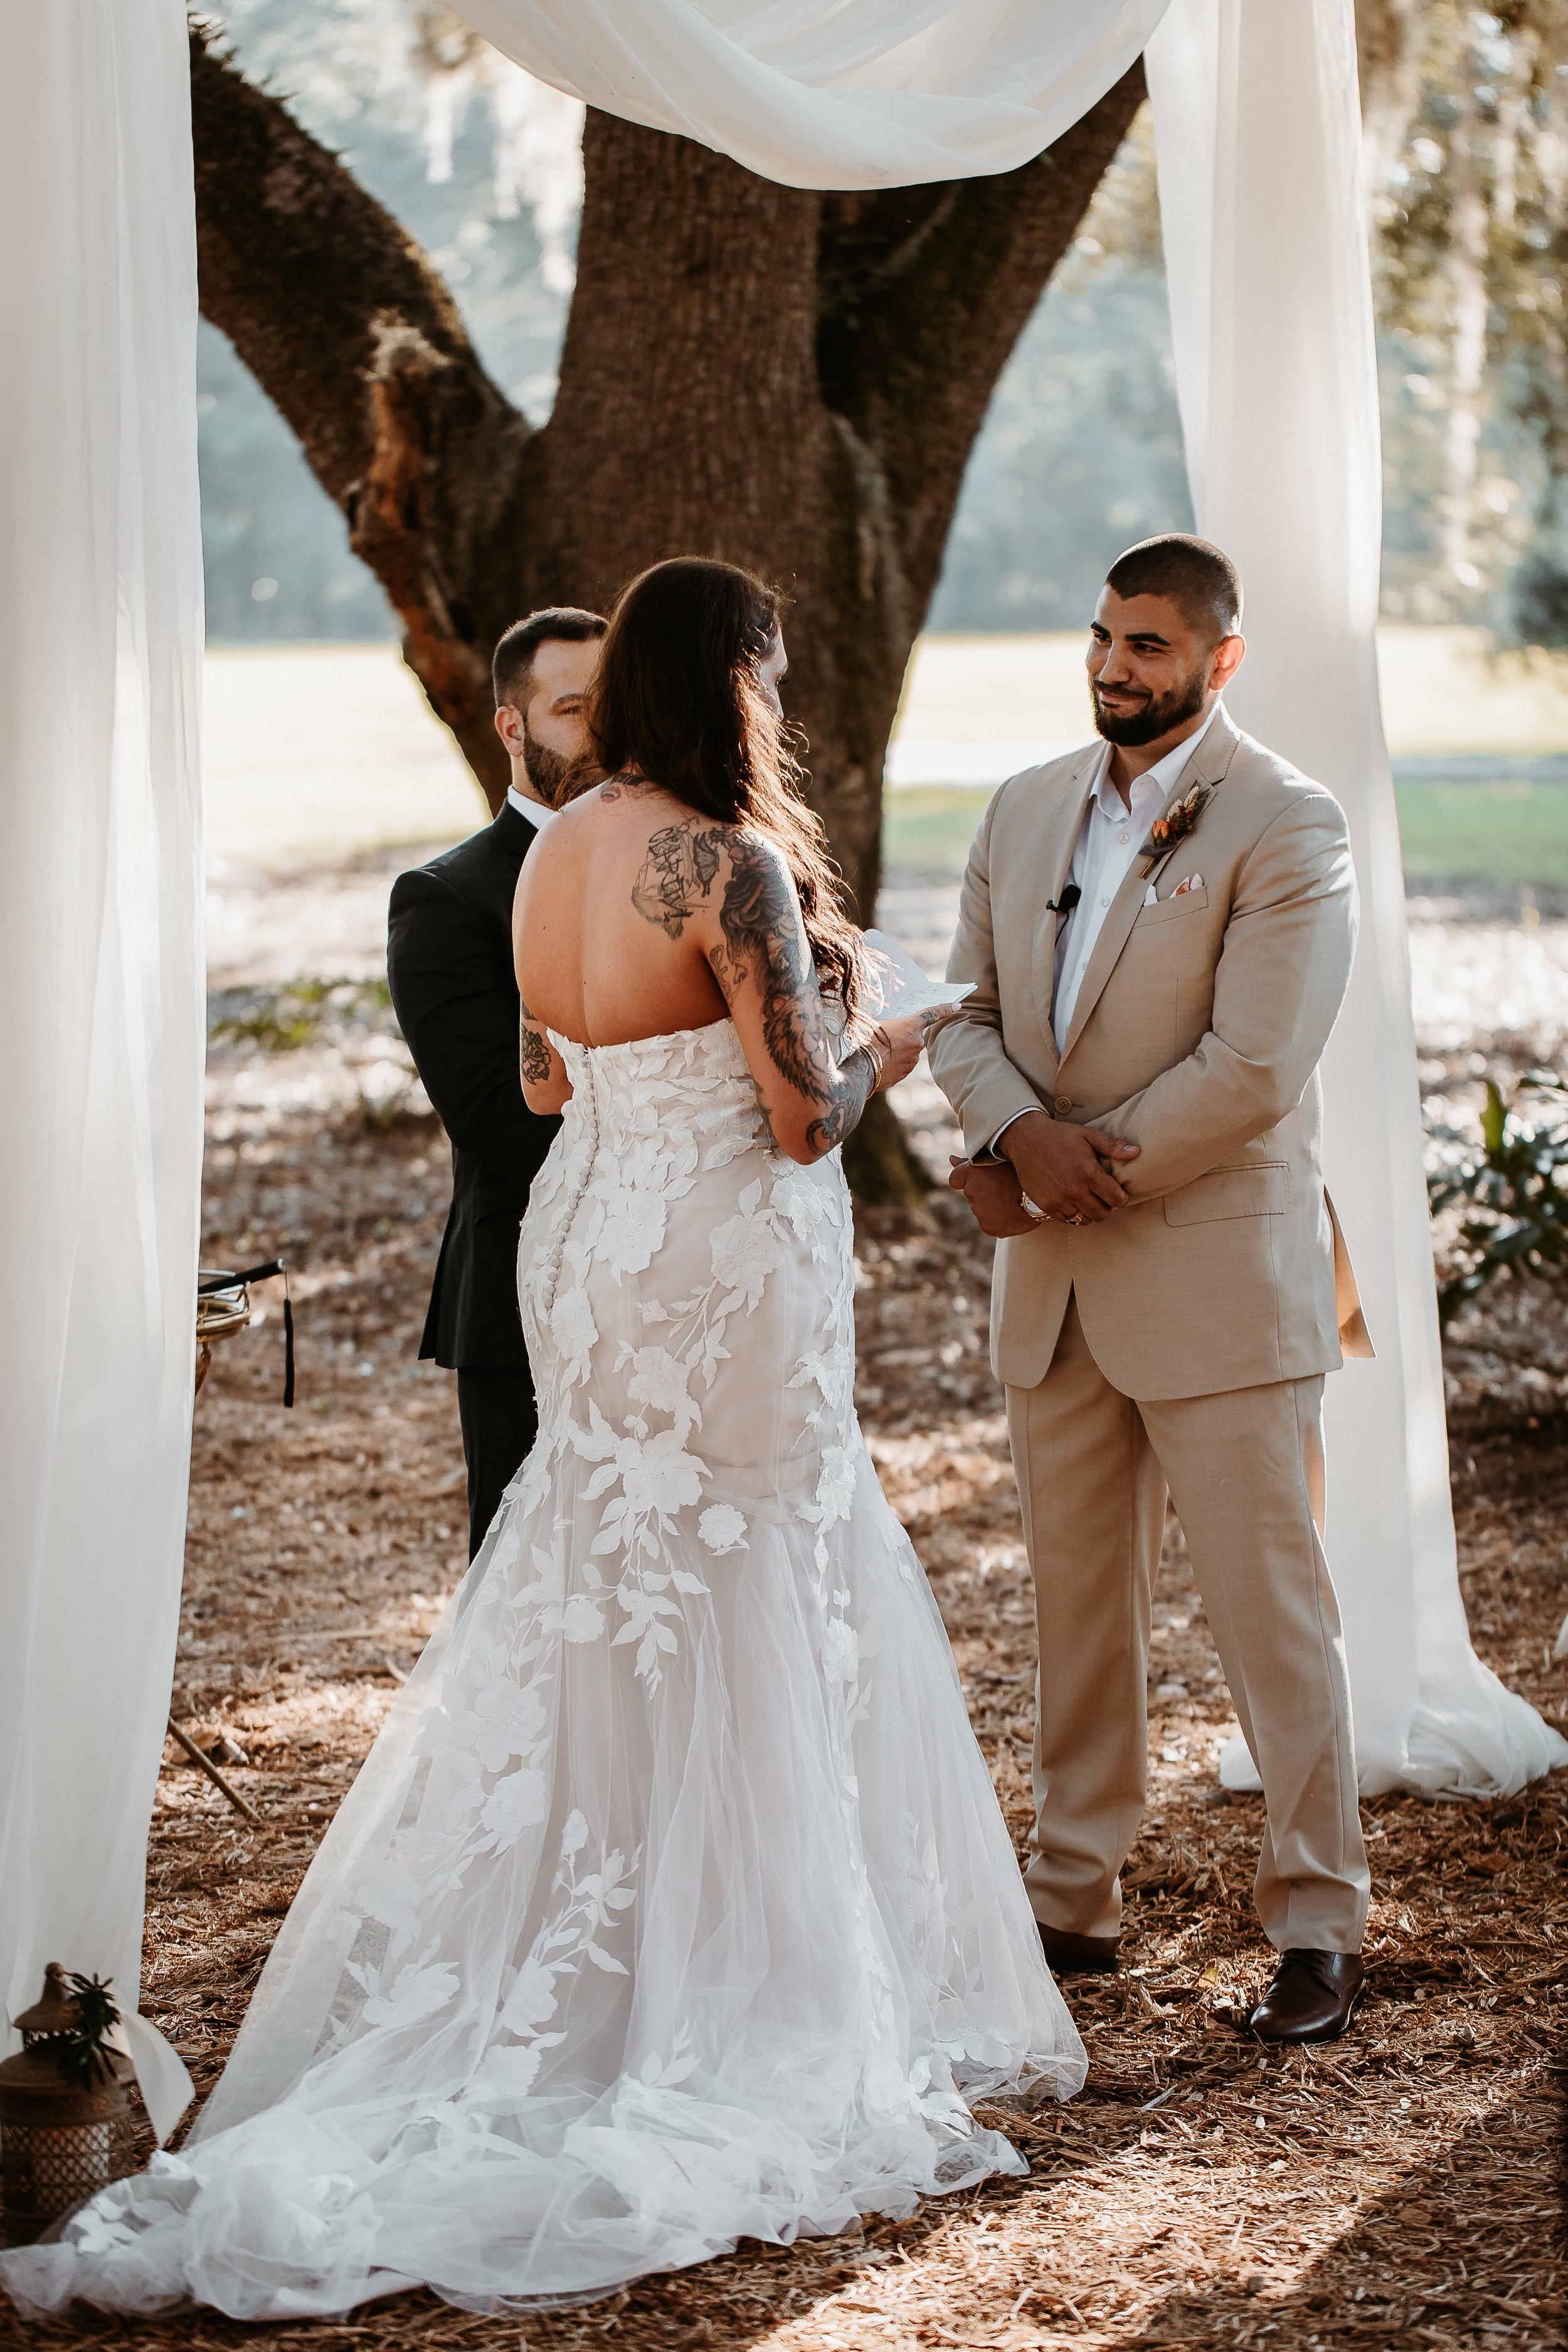 ivory-and-beau-blog-down-for-the-gown-real-bride-rebecca-ingram-wedding-dress-maggie-sottero-bridal-gown-strapless-wedding-dress-wedding-gown-savannah-bridal-shop-savannah-bridal-boutique-savannah-georgia-Annie & Cam Wedding-513.jpg